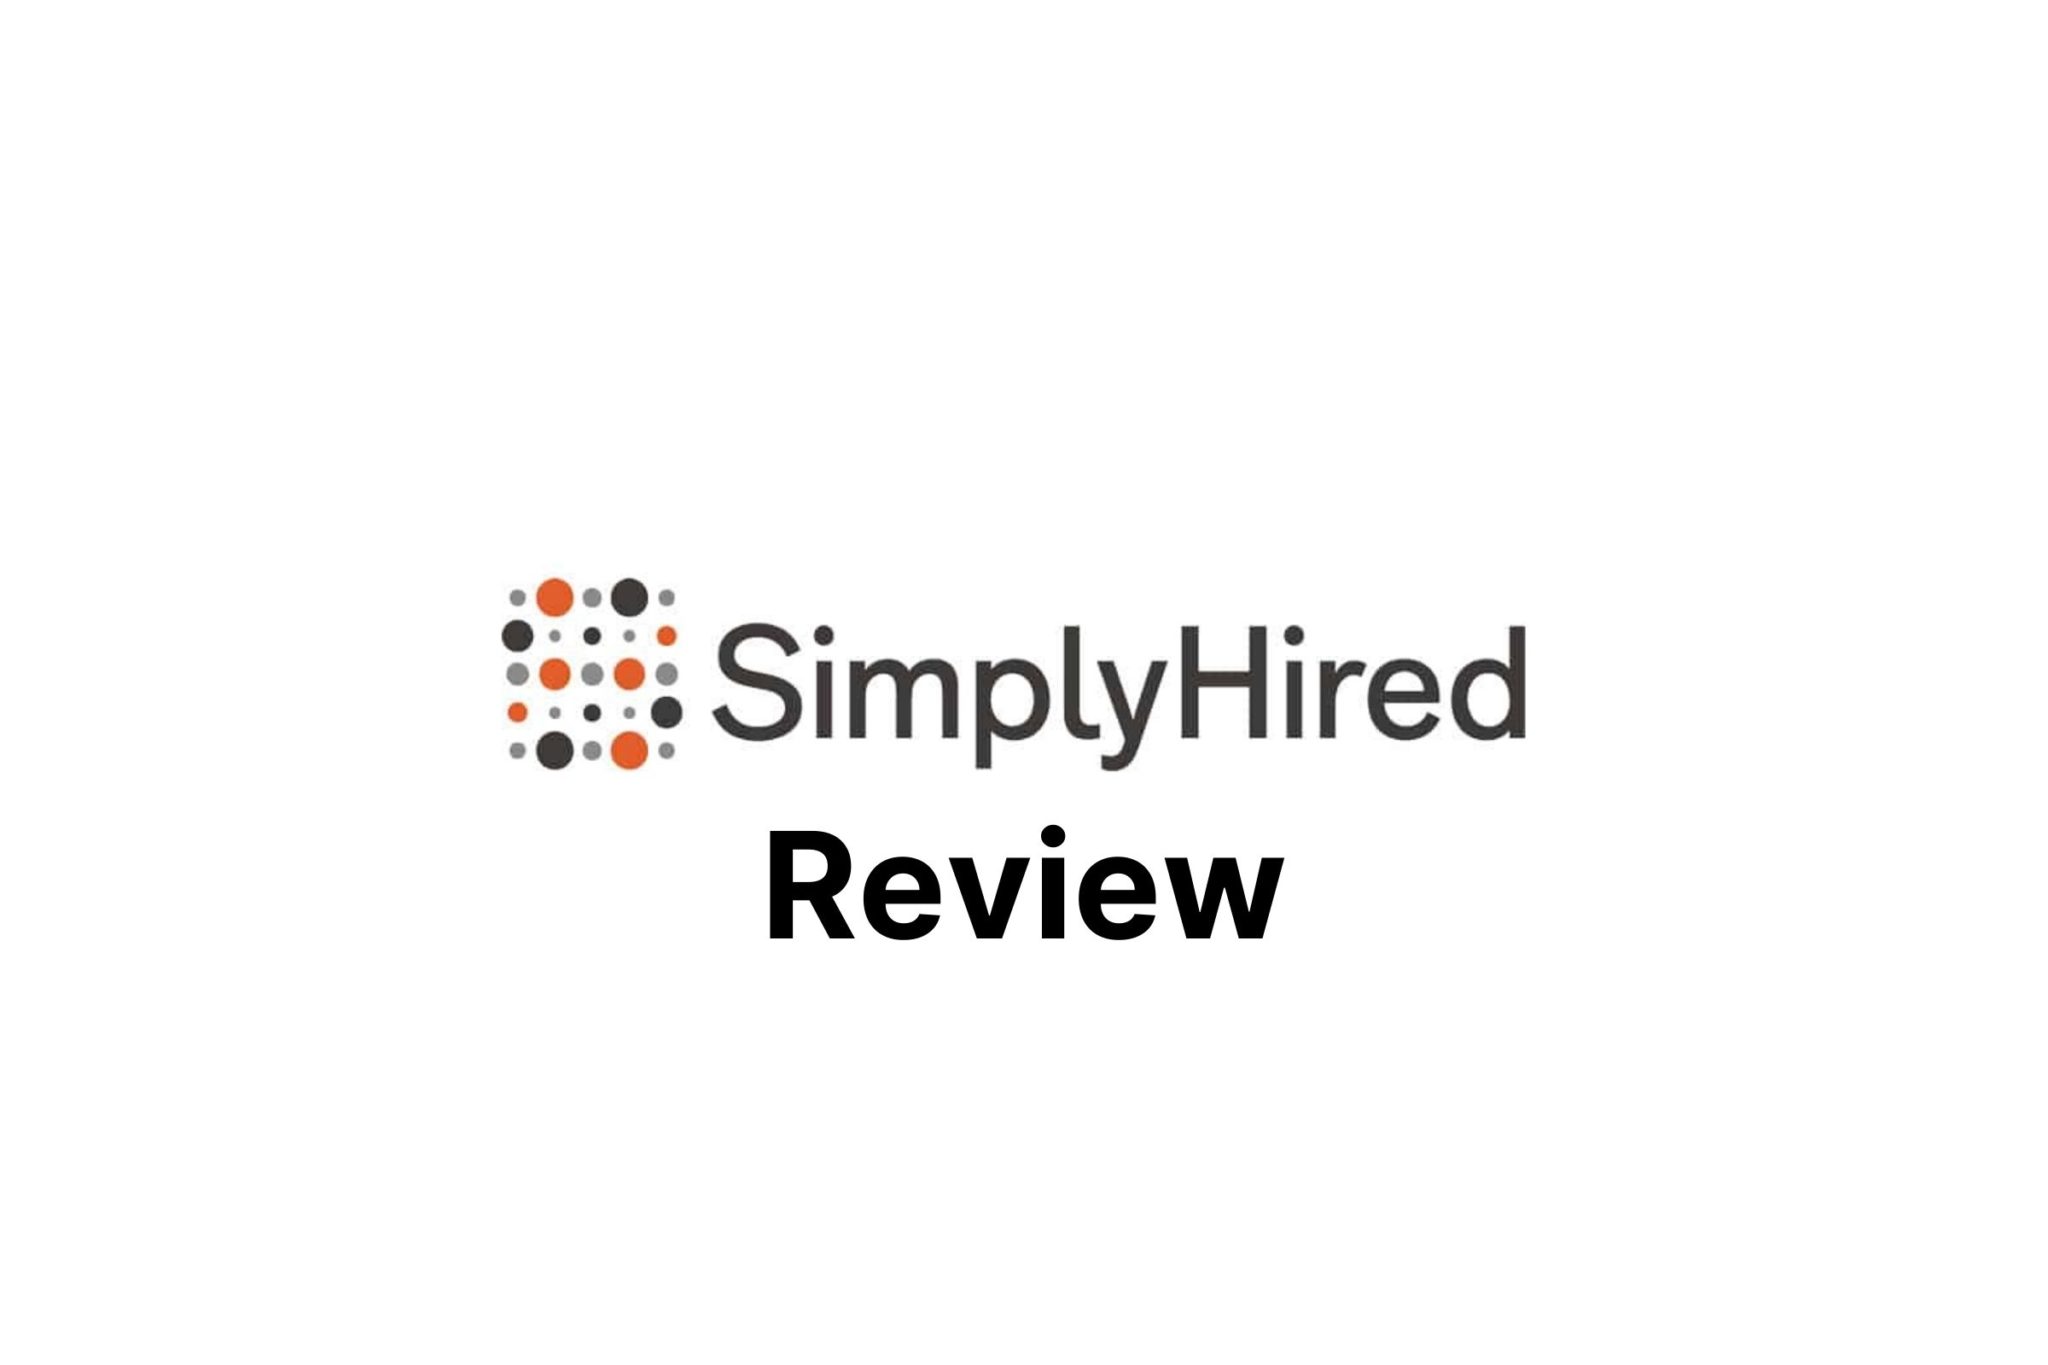 Review of SimplyHired